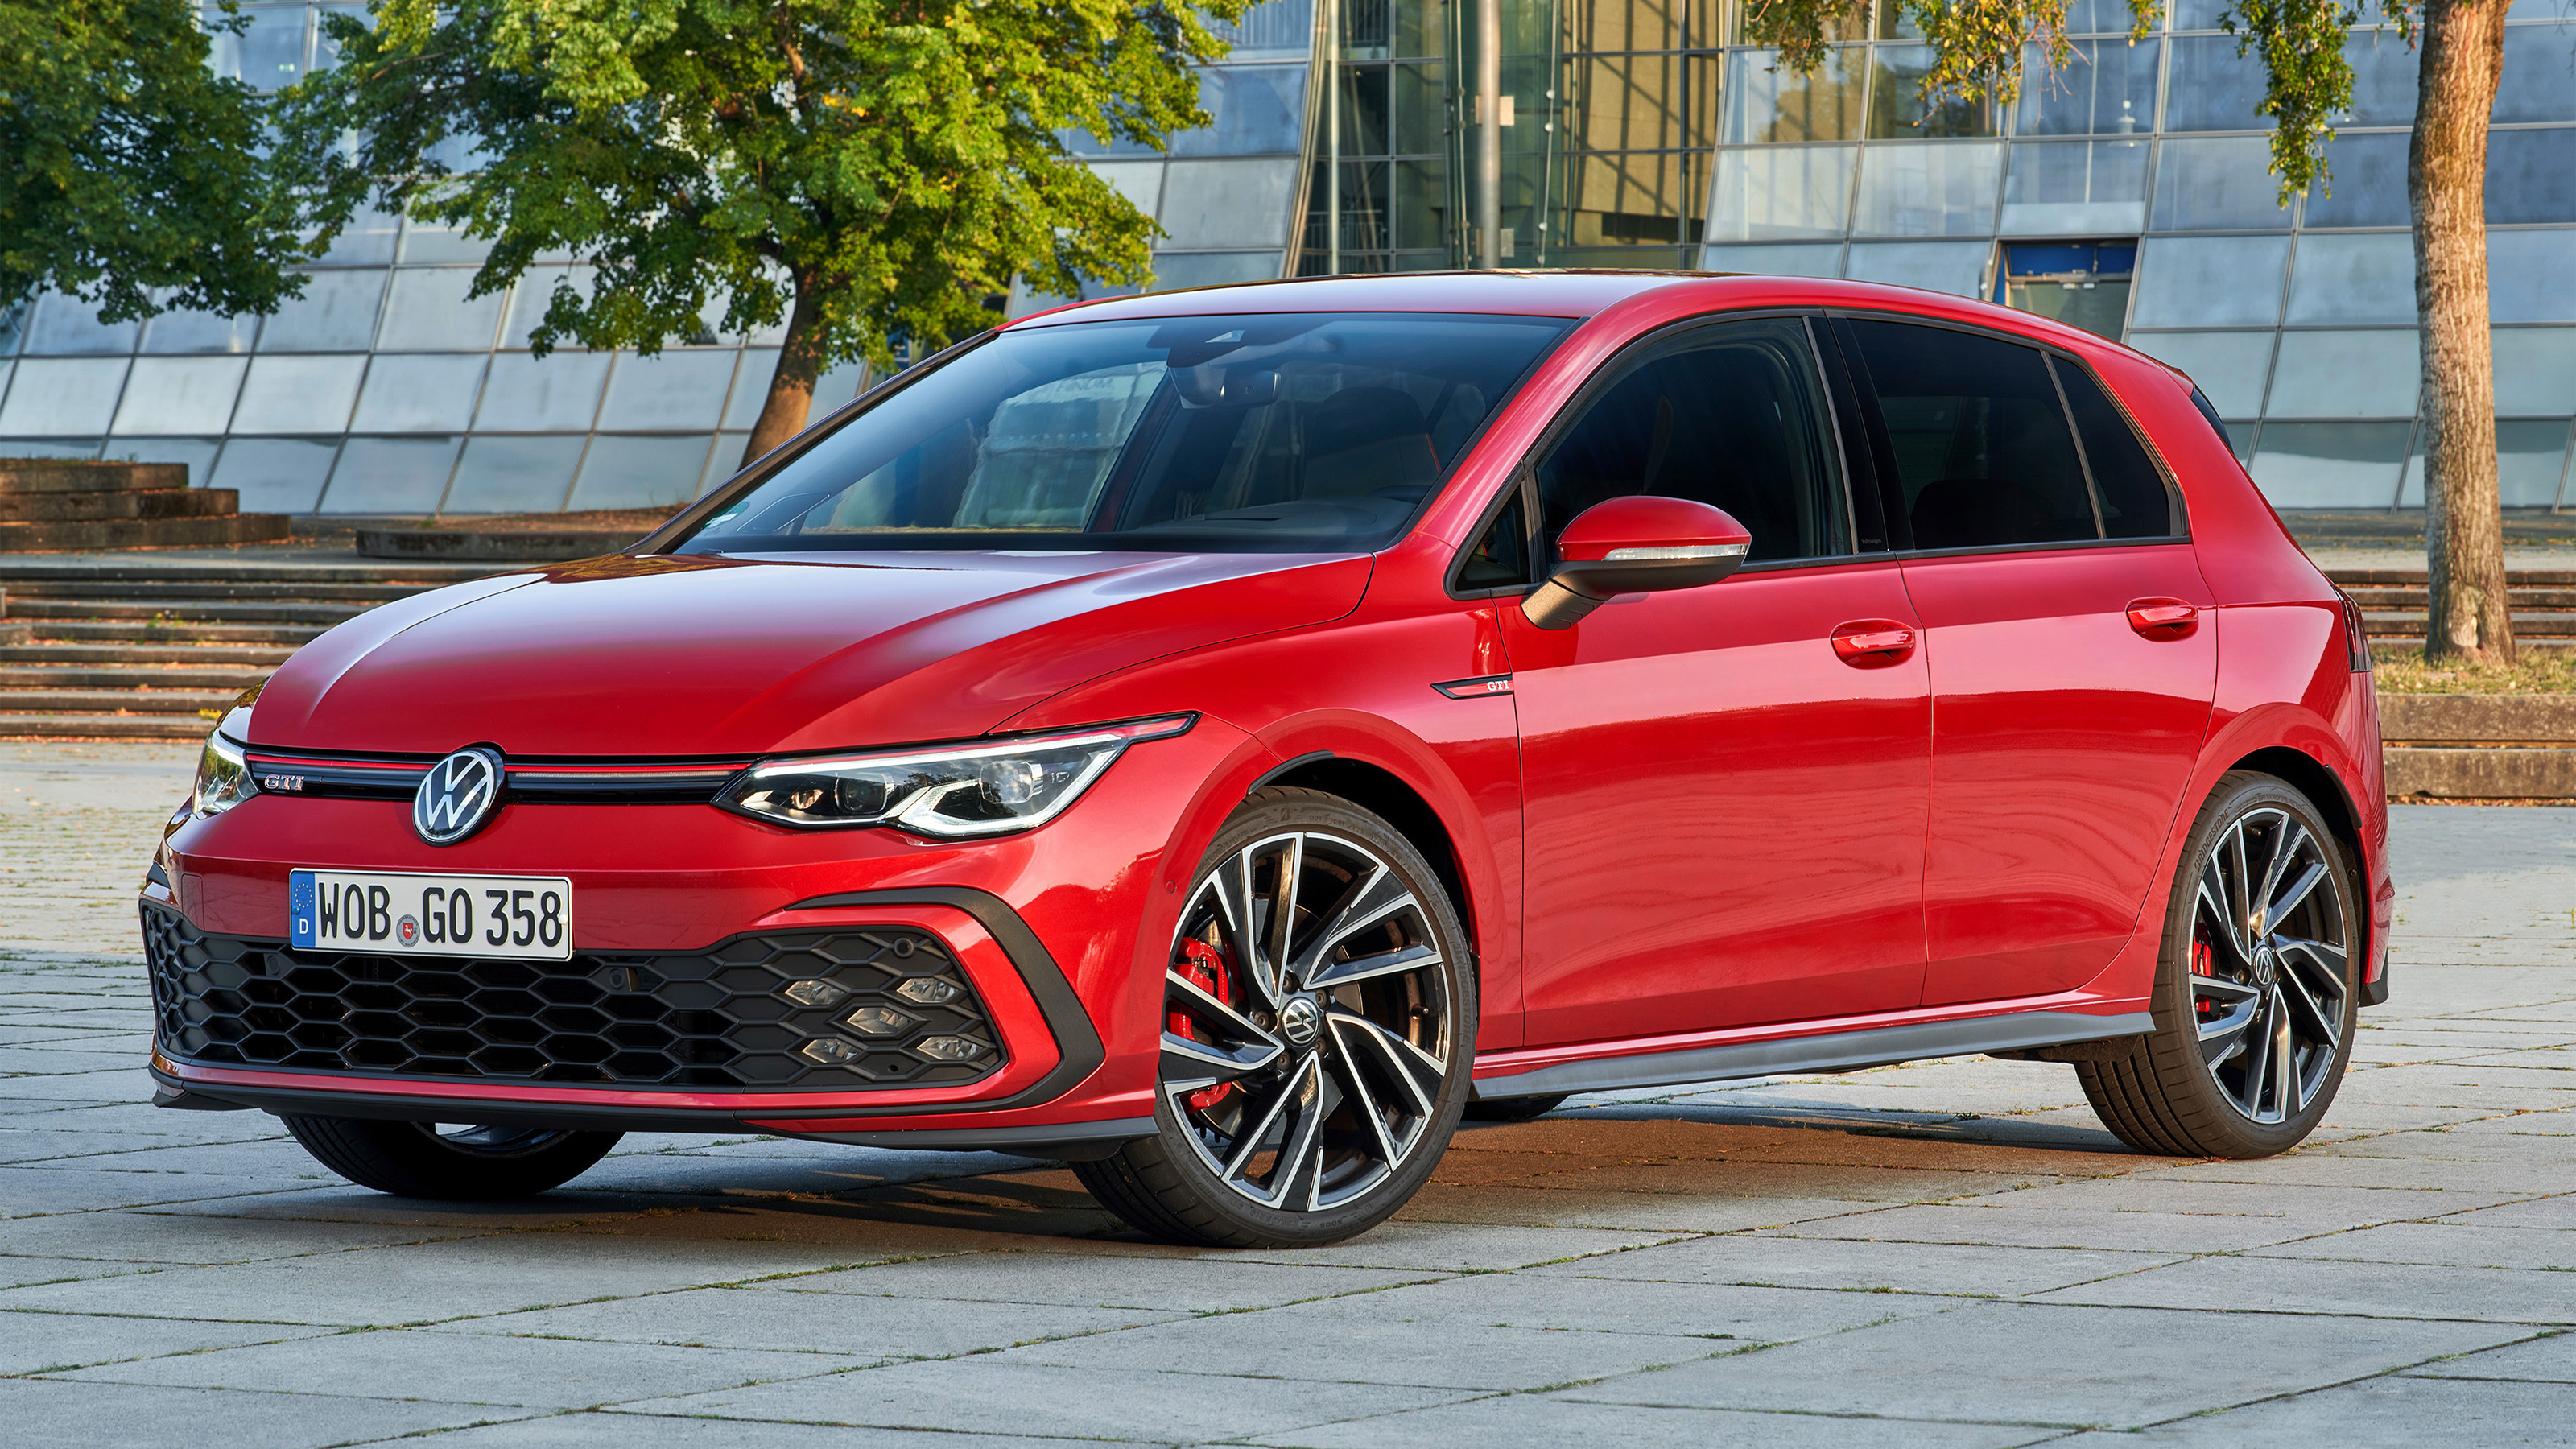 New 2020 Volkswagen Golf Gti Priced From £33460 Auto Express